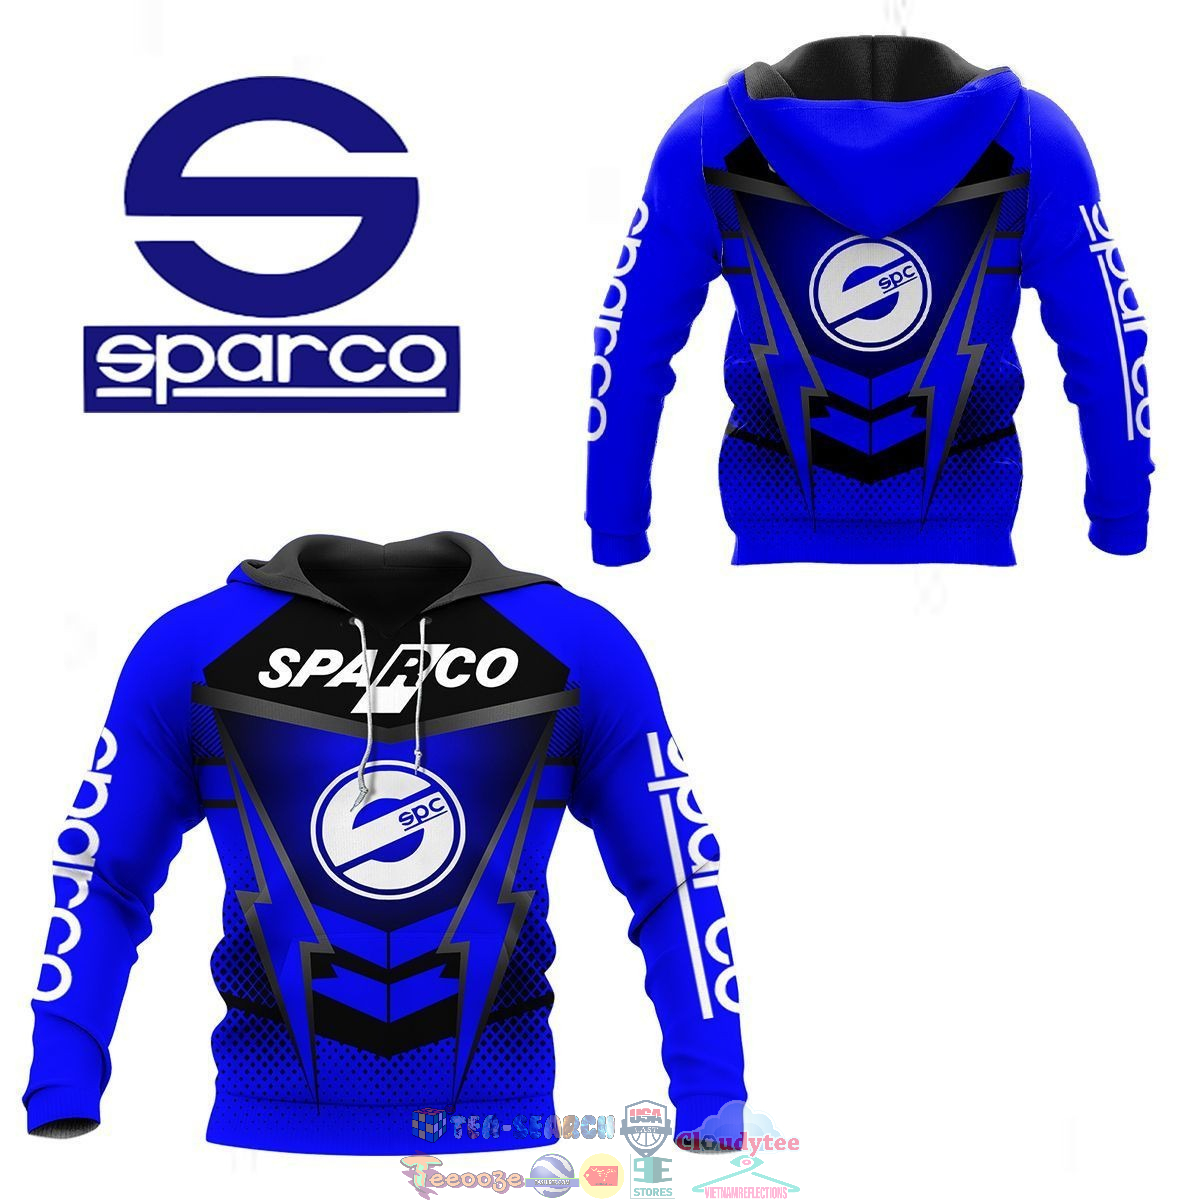 Sparco ver 18 3D hoodie and t-shirt